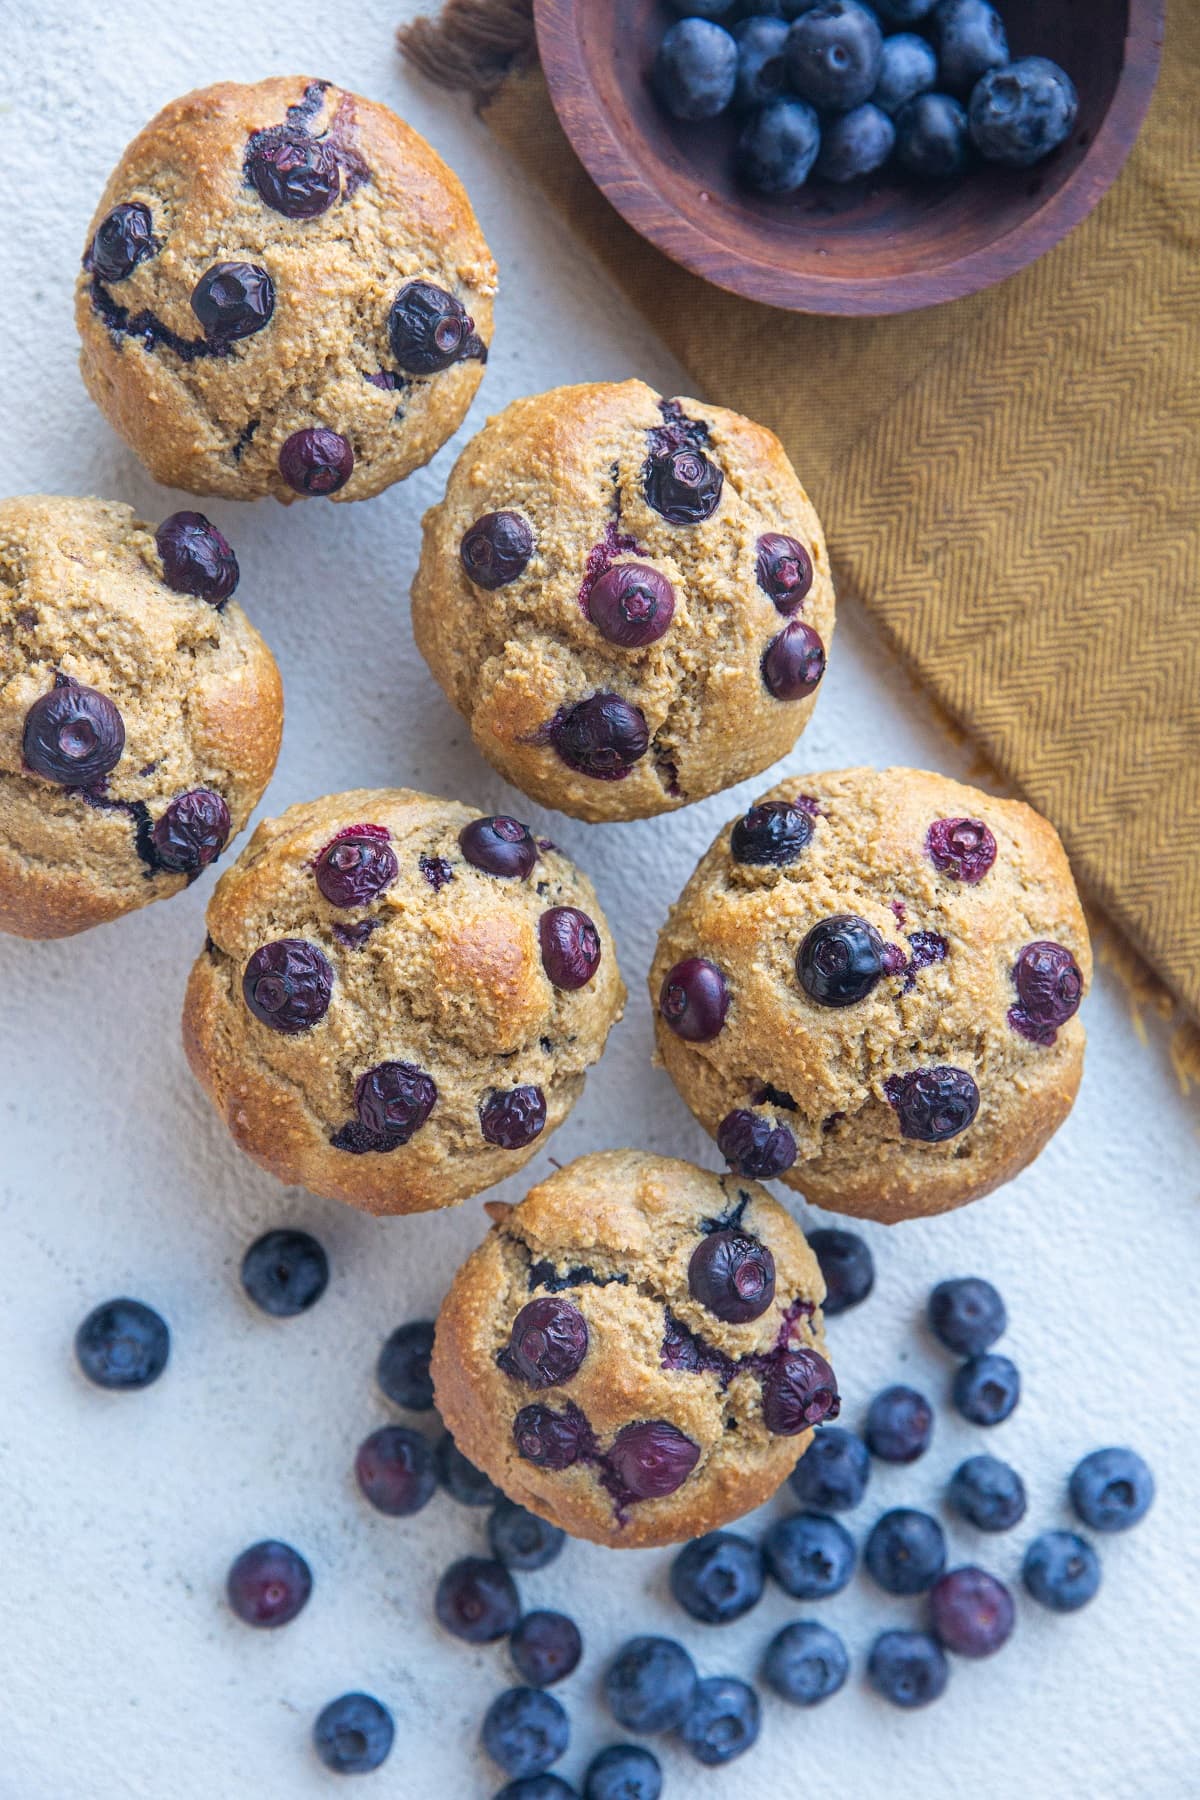 Six blueberry banana muffins on a white background with a golden napkin and fresh blueberries scattered about.